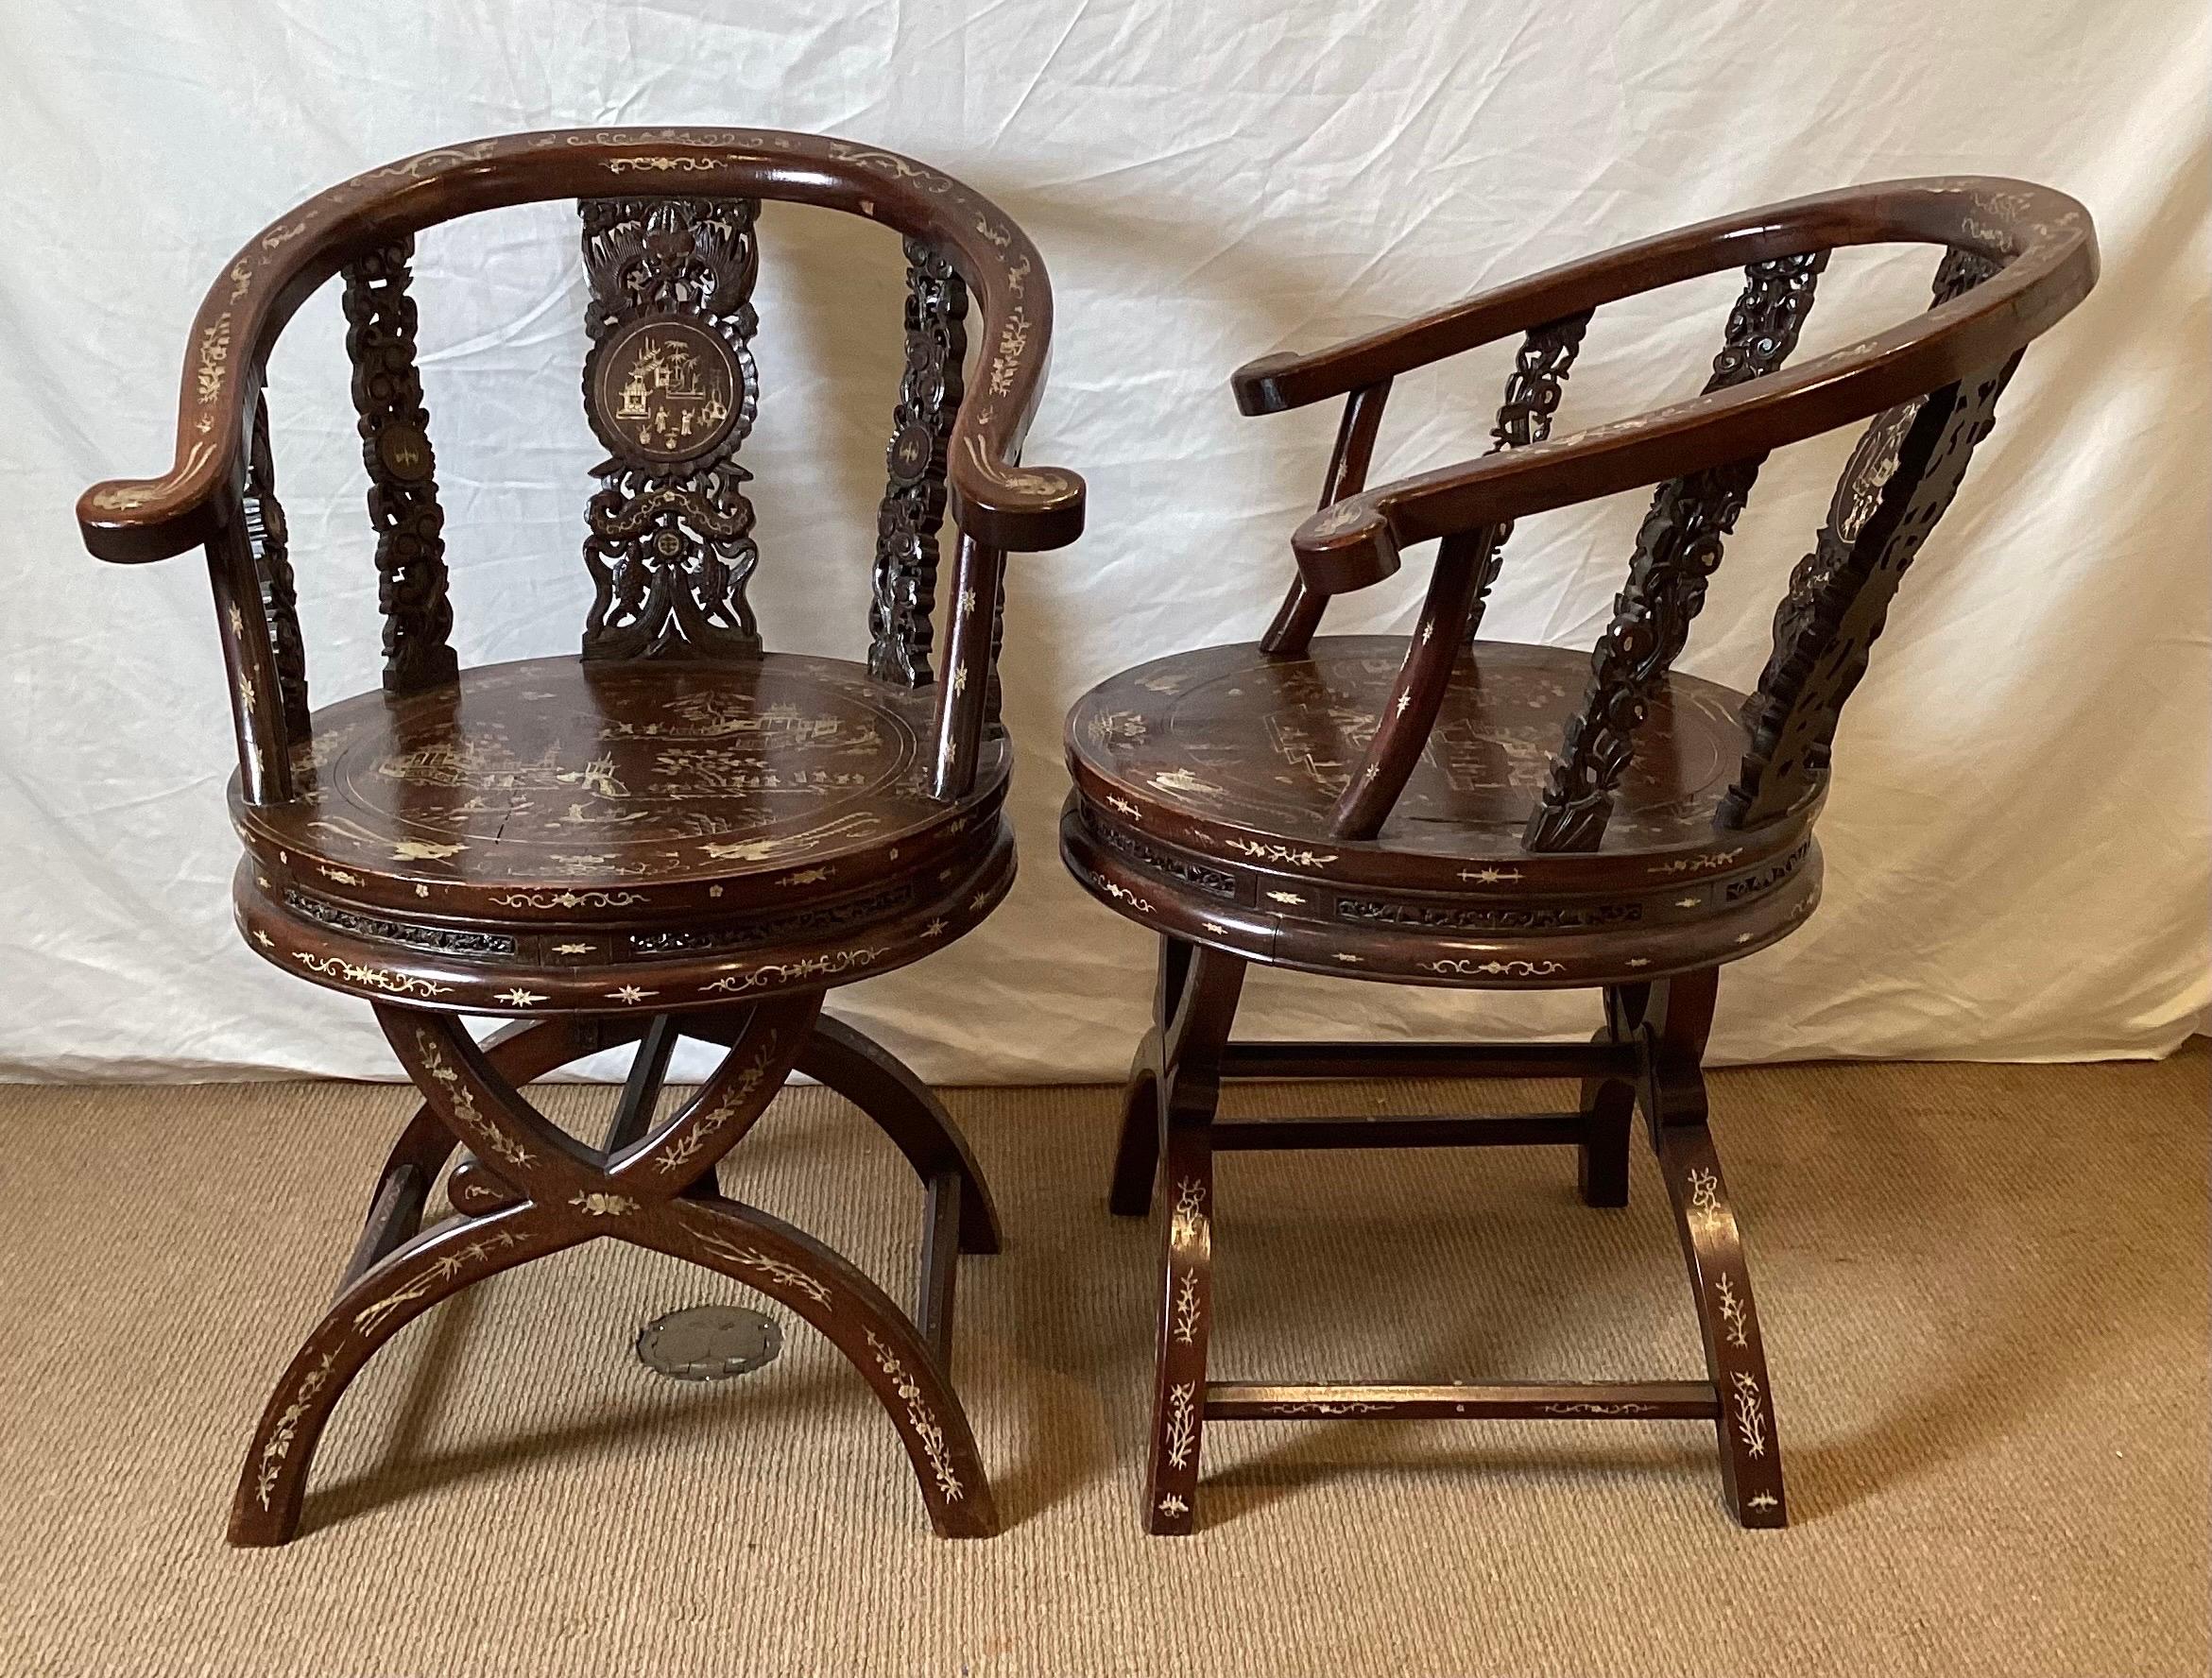 Circa 1890-1900 Hand Carved and Inlaid Asian Arm Chairs Depicting a Village In Good Condition For Sale In Lambertville, NJ